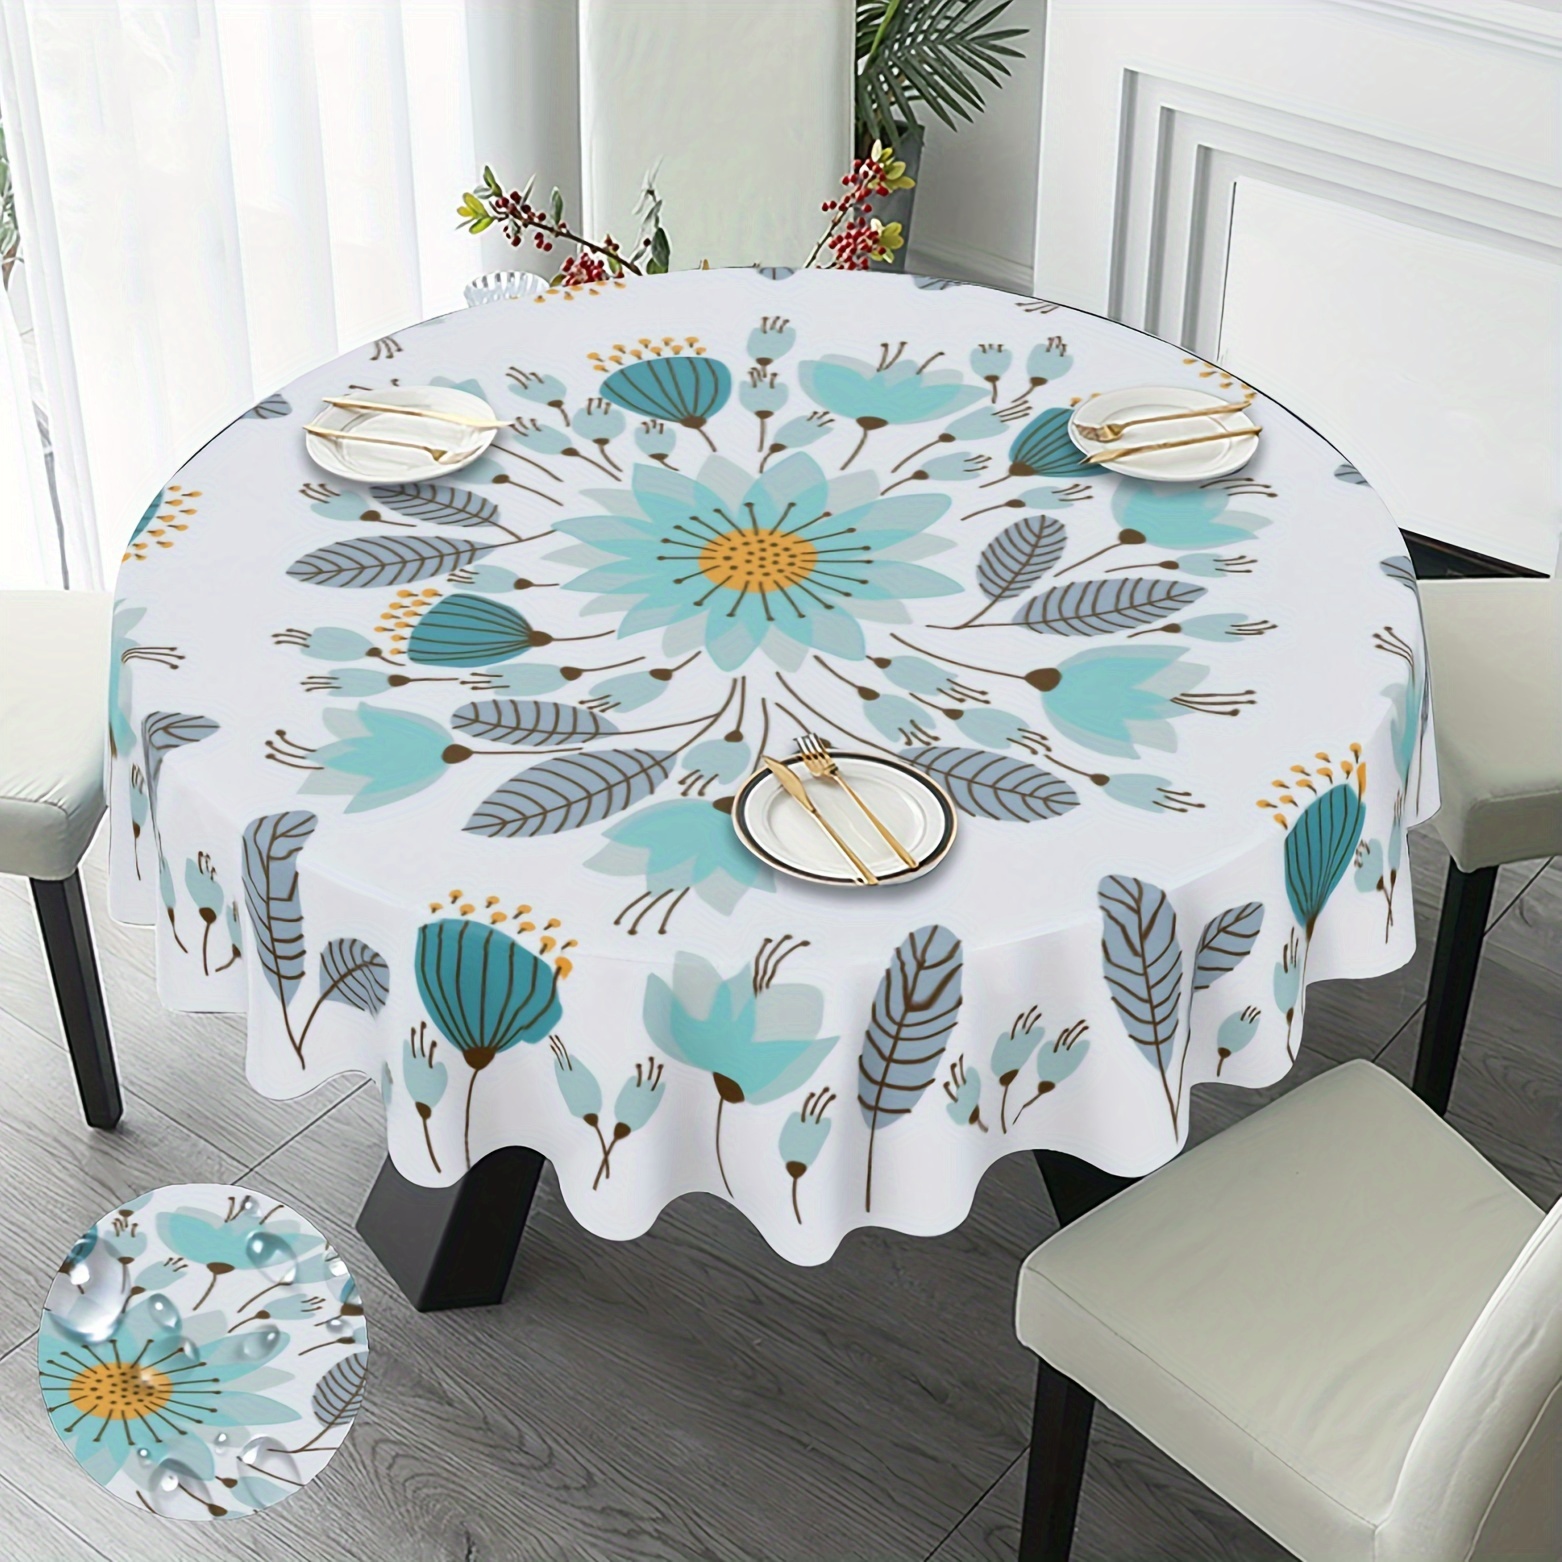 

1pc, Teal Tablecloth, Floral Round Table Cloth, Boho Style Flower Plant Printed Table Cover, Spring Theme Seasonal Tablecloth, Outdoor And Indoor Table Cover For Home, Dining Table Decor